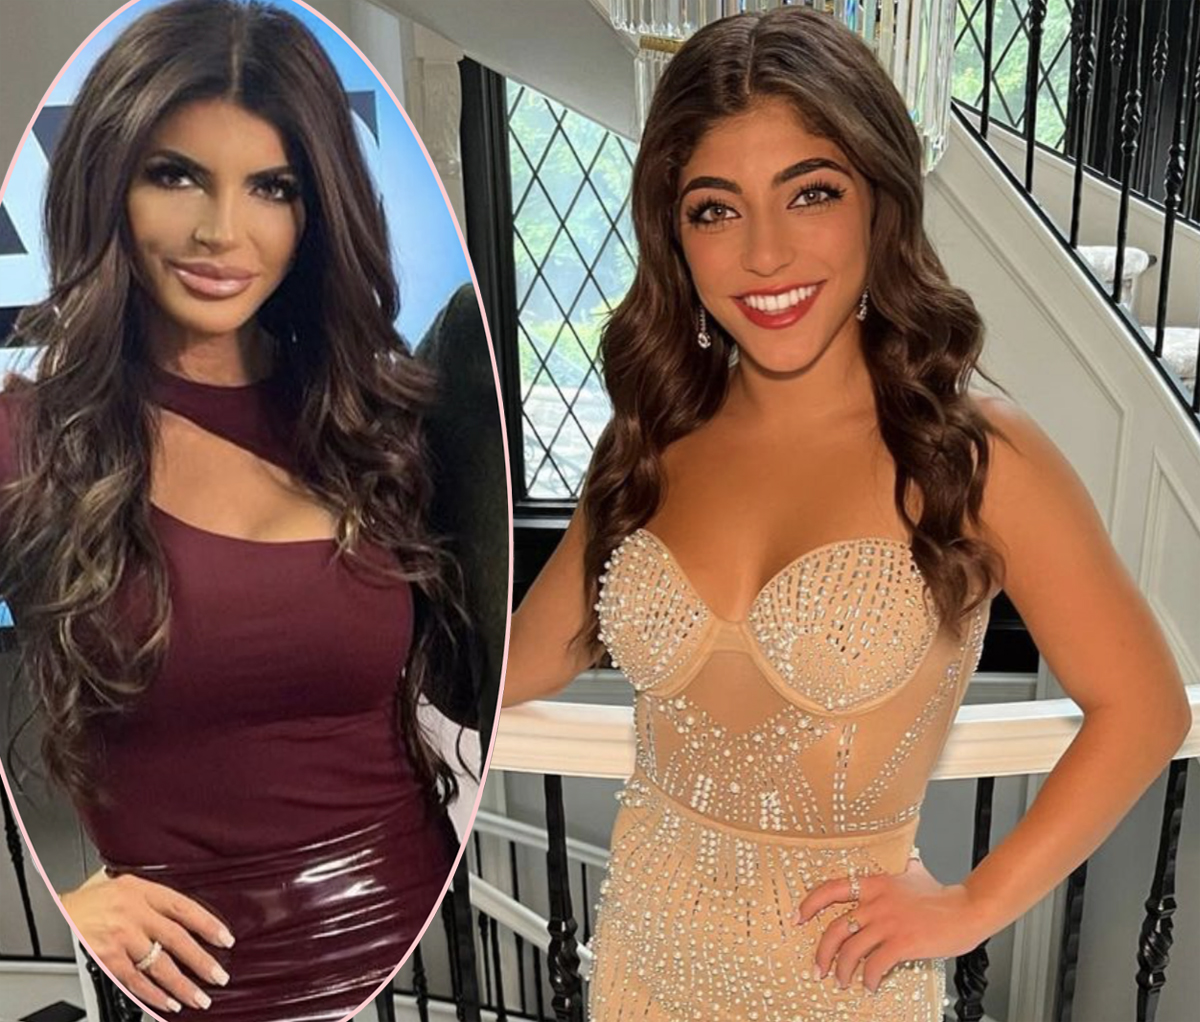 #RHONJ’s Milania Giudice Lost 40 LBS In TWO MONTHS After Teresa Food-Shamed Her!